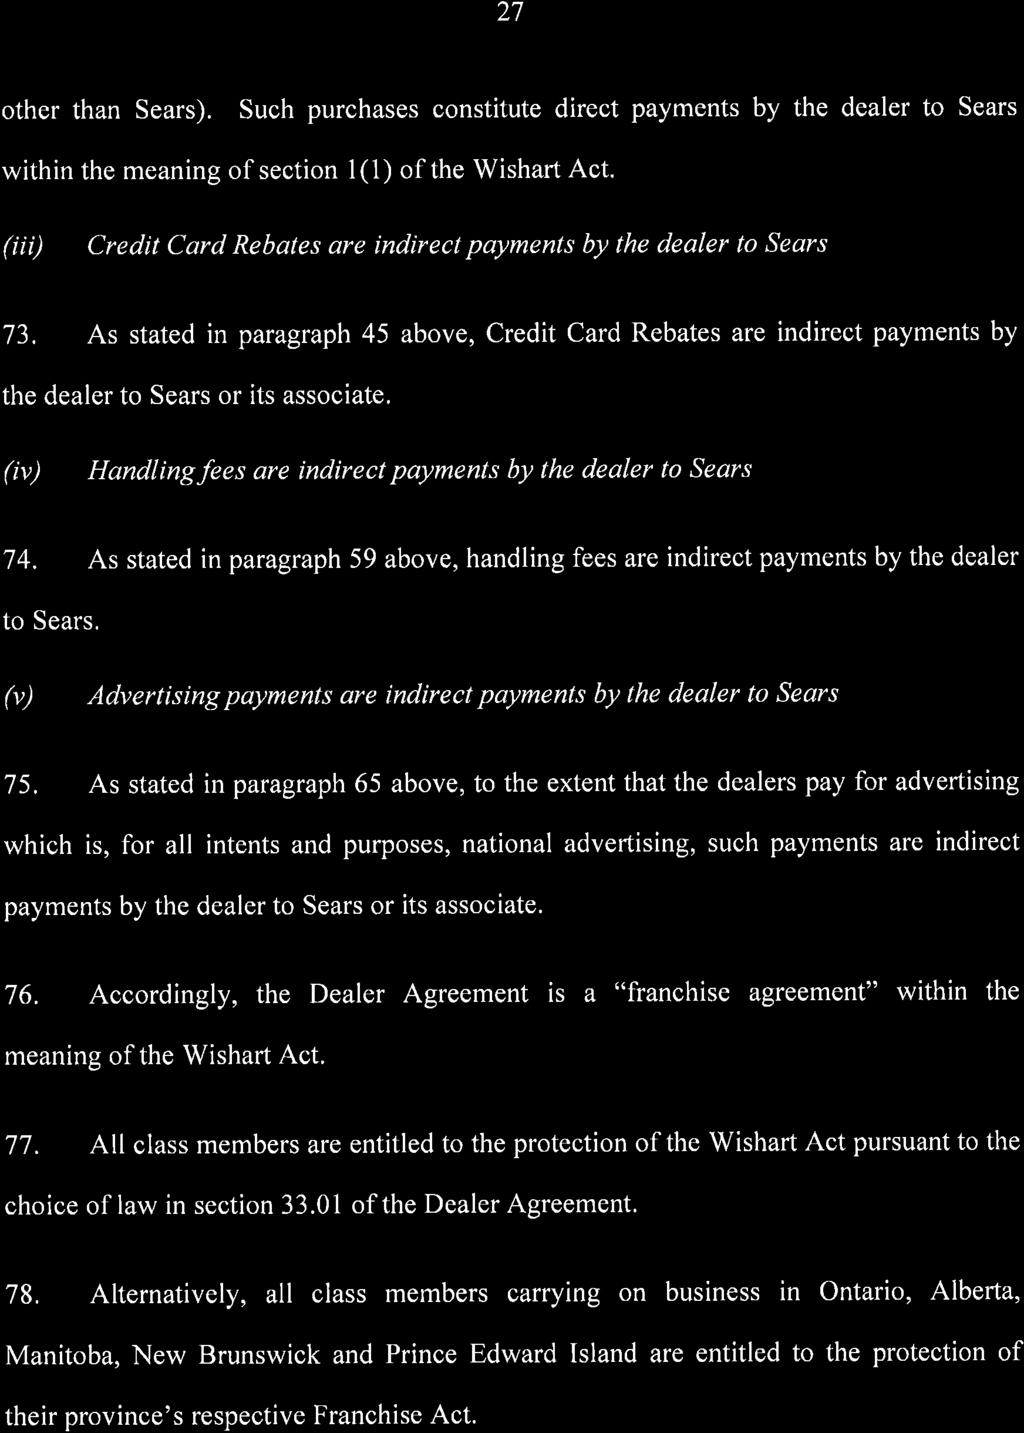 27 other than Sears). Such purchases constitute direct payments by the dealer to Sears within the meaning of section l(1) of the Wishart Act.